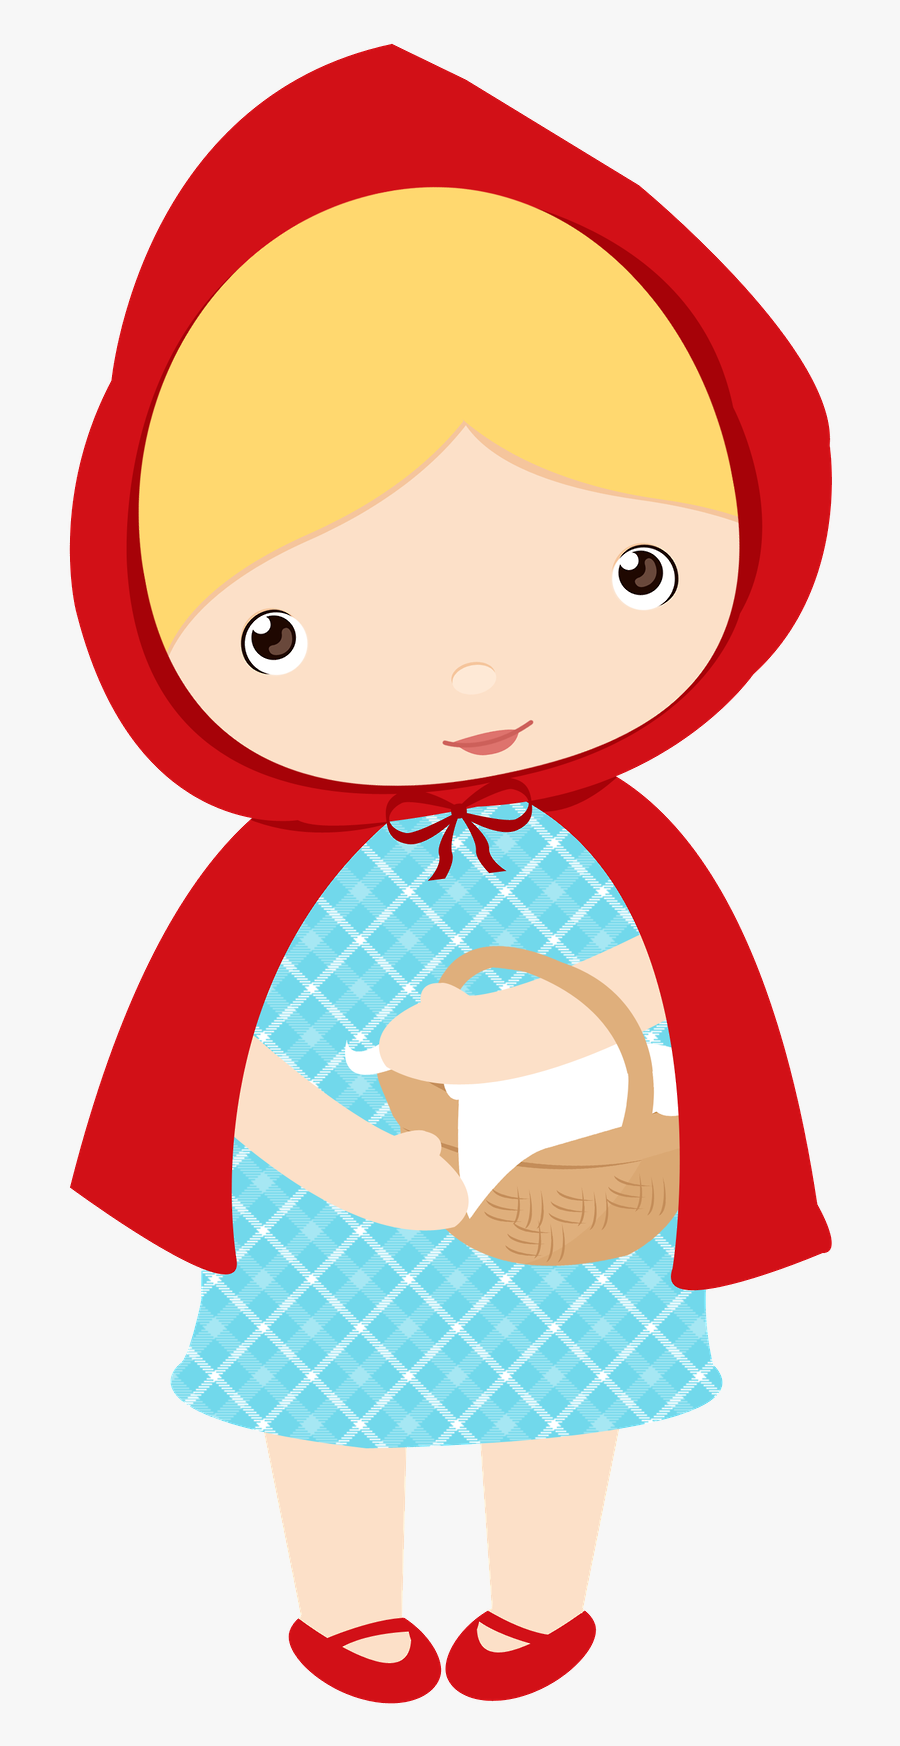 Minus Red Riding Hood, Little Red Ridding Hood, Silhouette - Little Red Riding Hood Transparent Background, Transparent Clipart